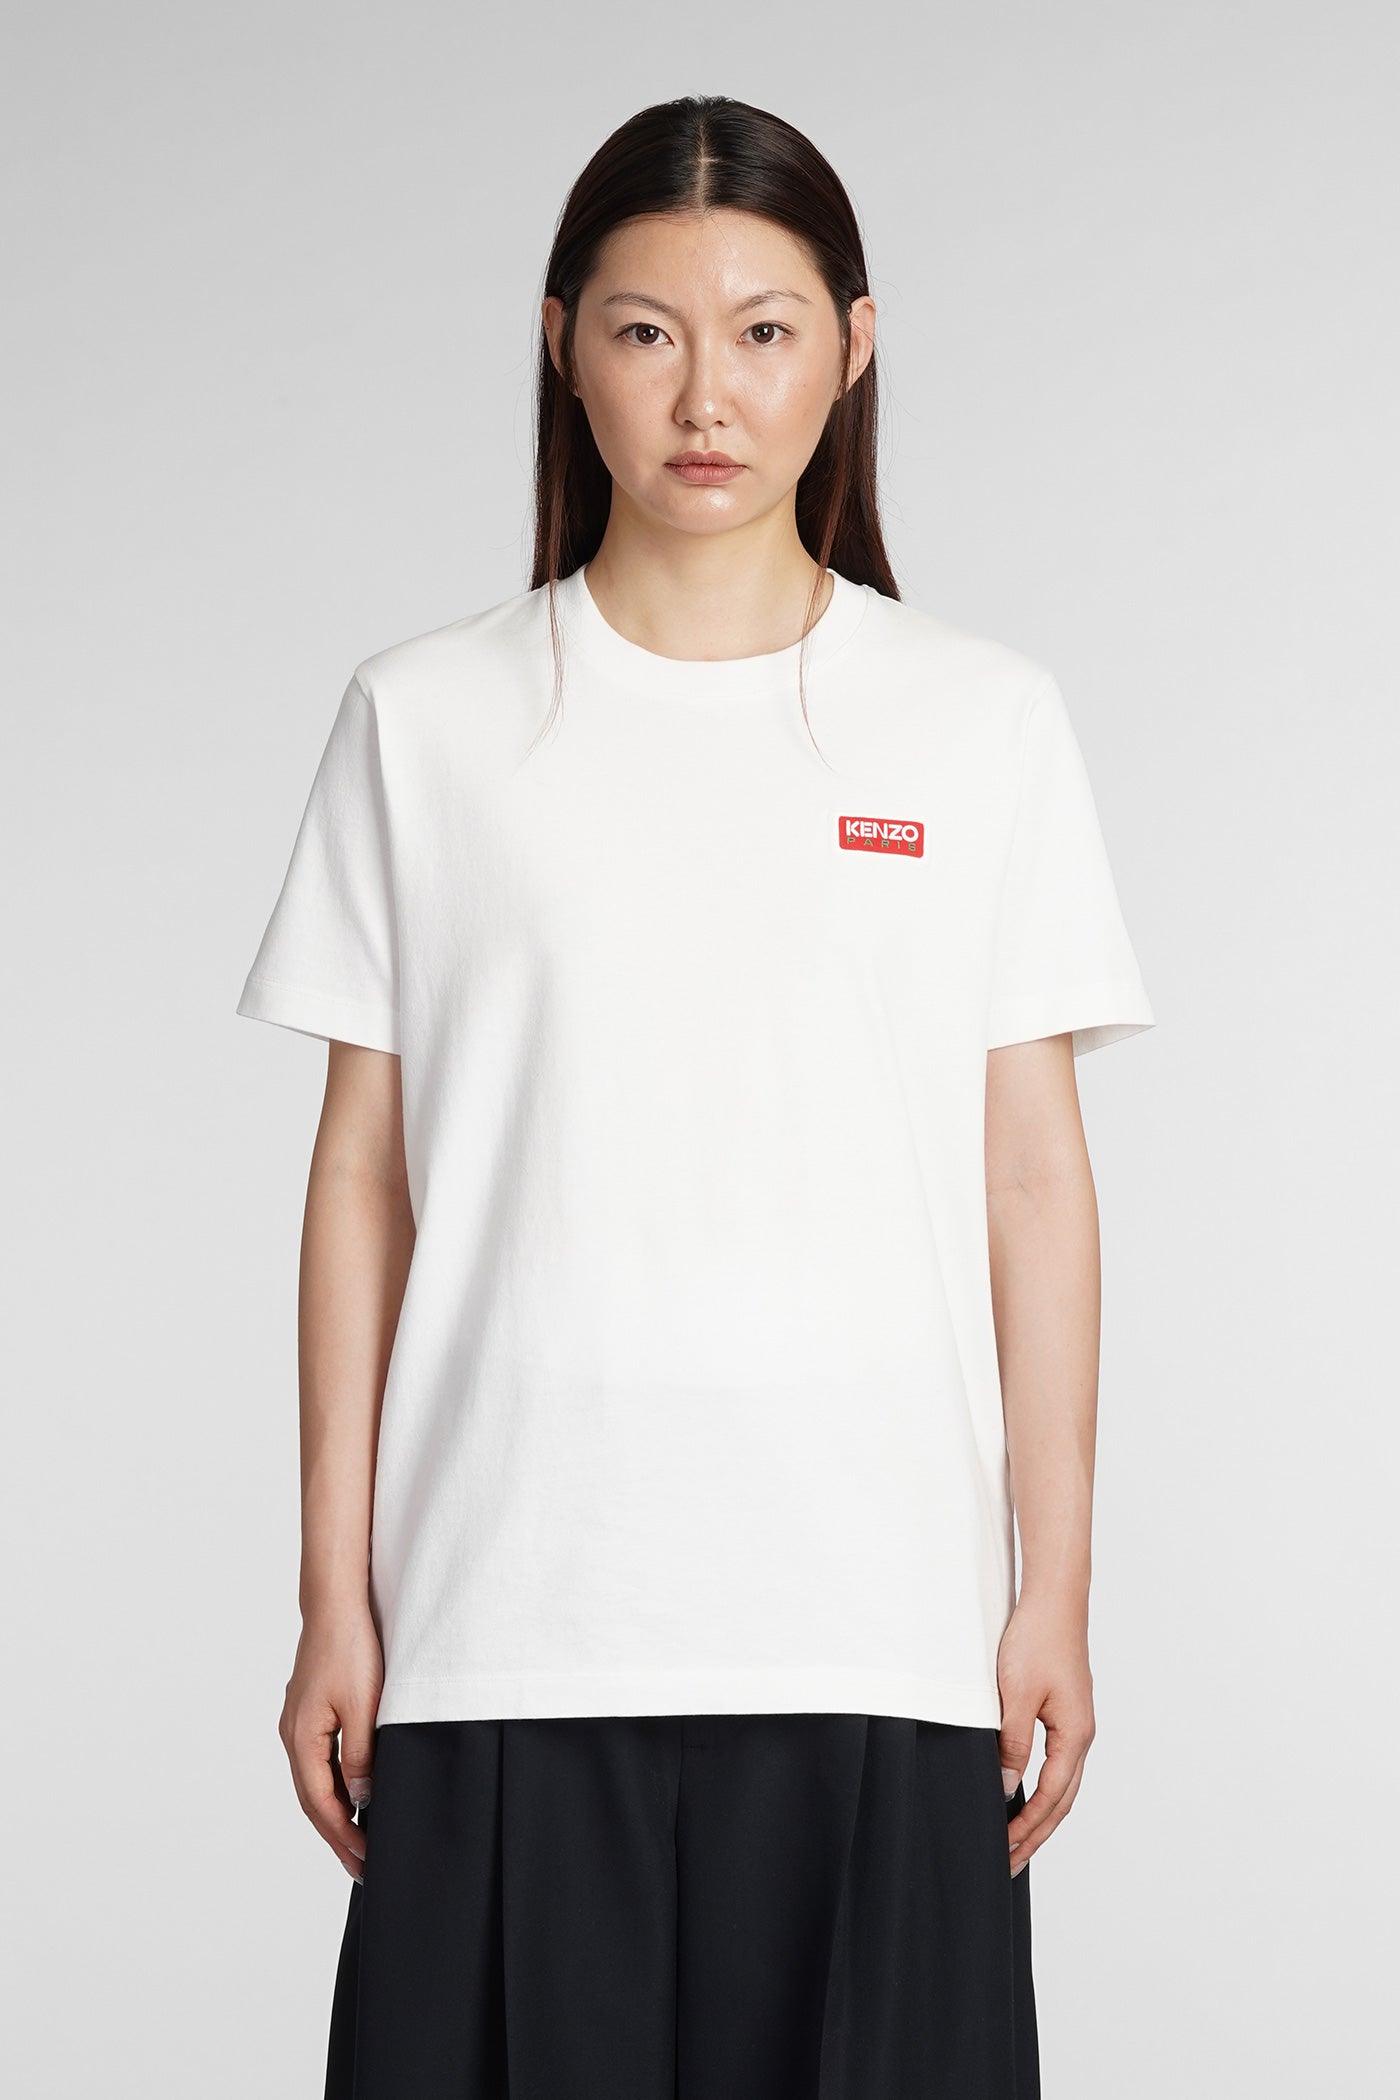 T-Shirt in white cotton